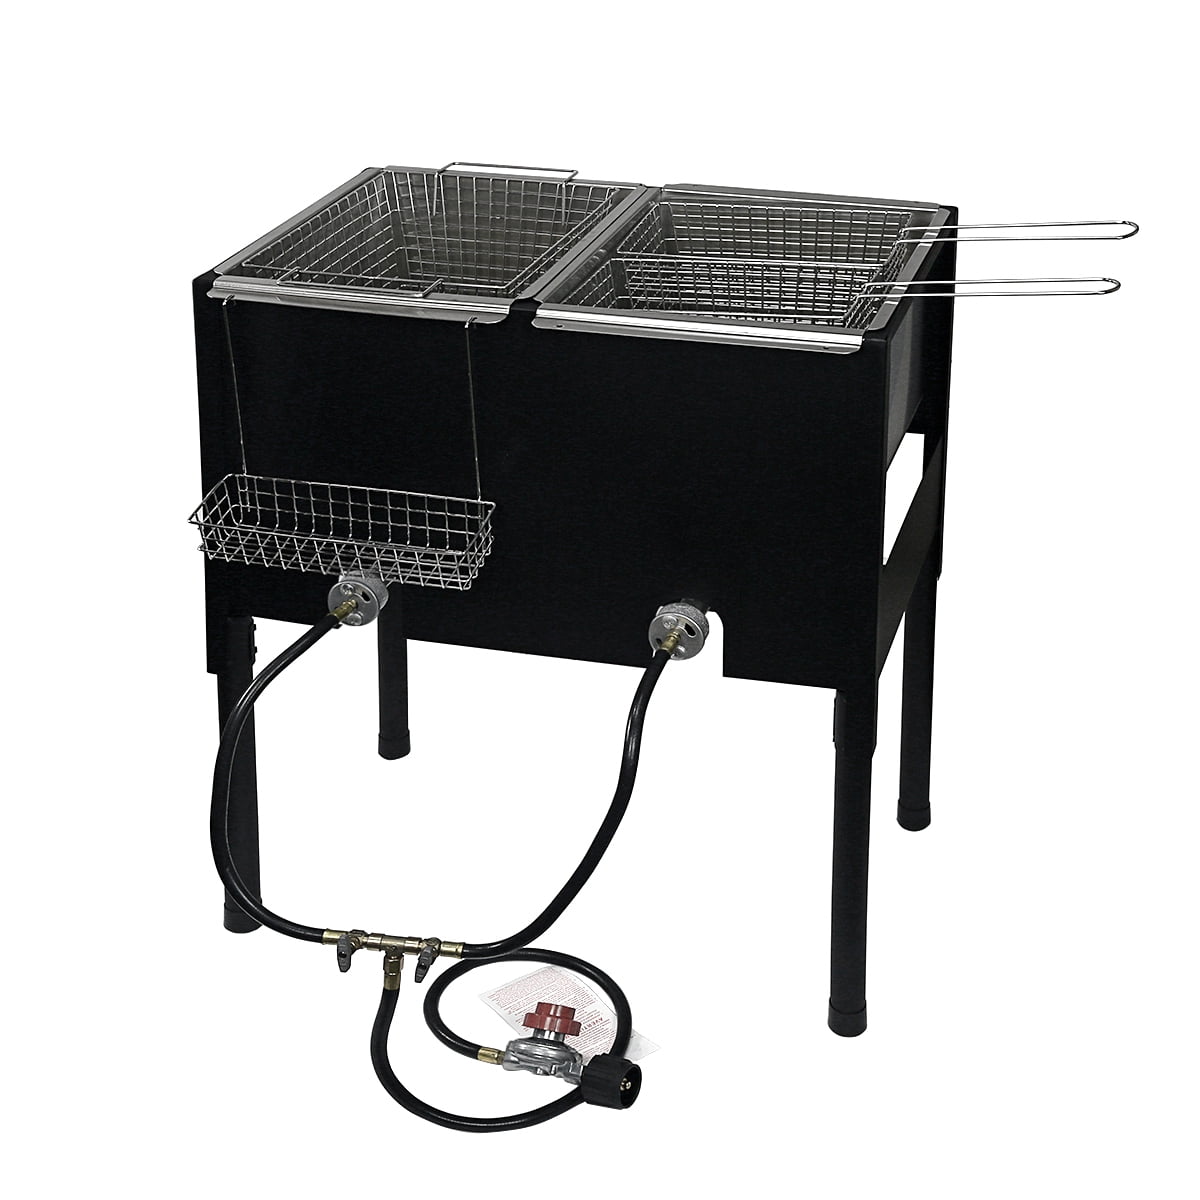 Barbour 700-704 Stainless Fryer With Cart, 4 Gallon